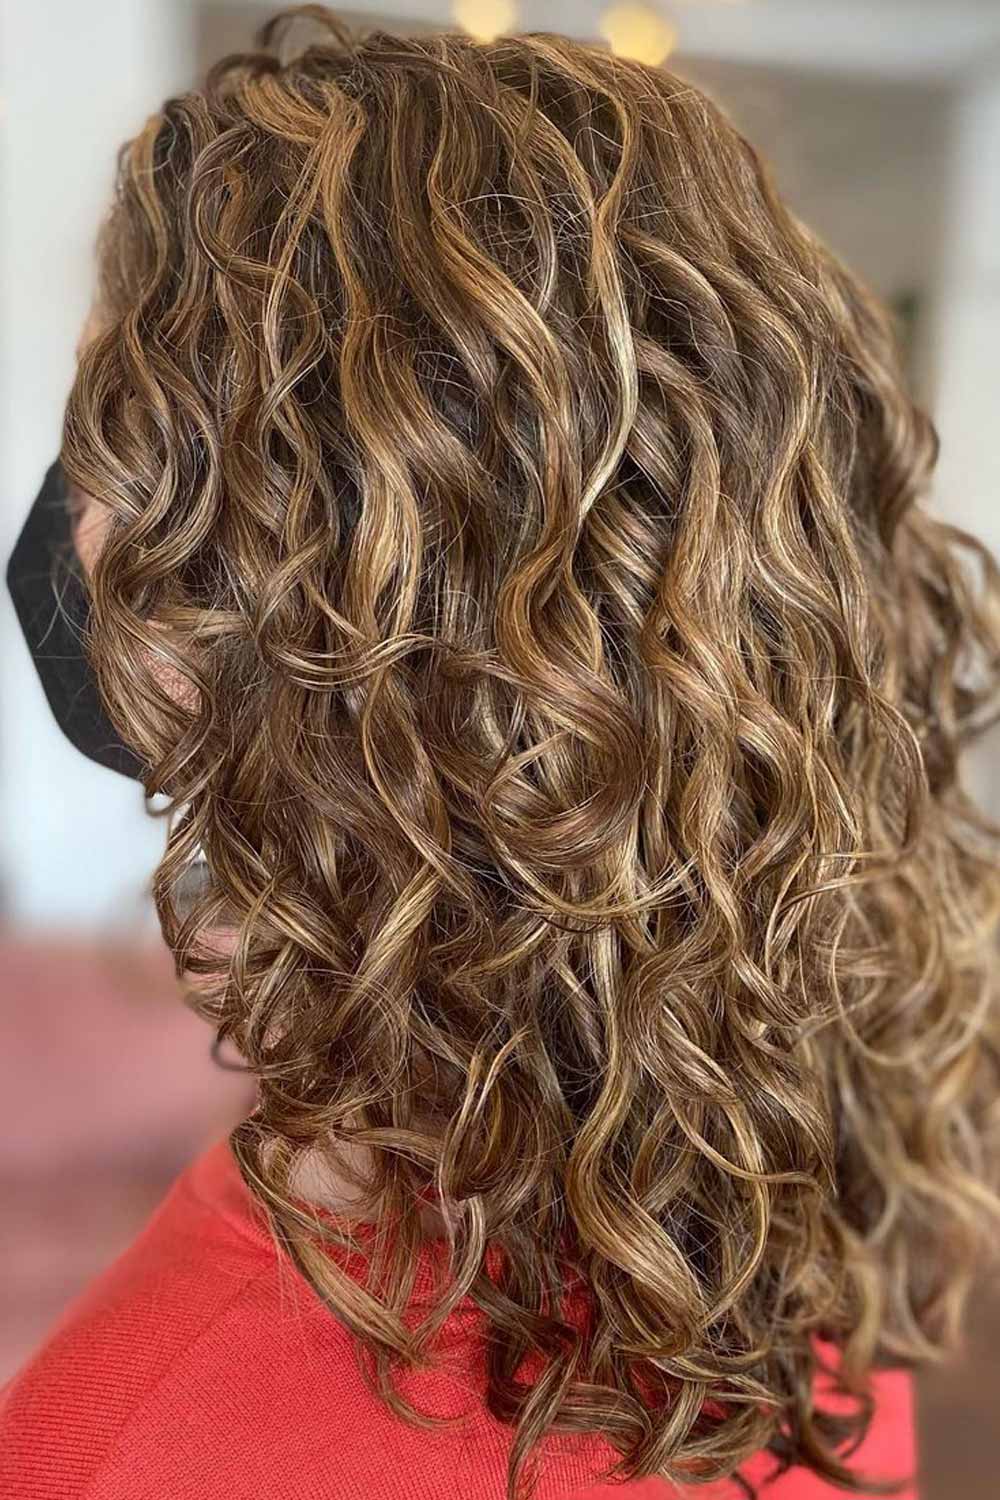 How to Color Curly Hair with Balayage